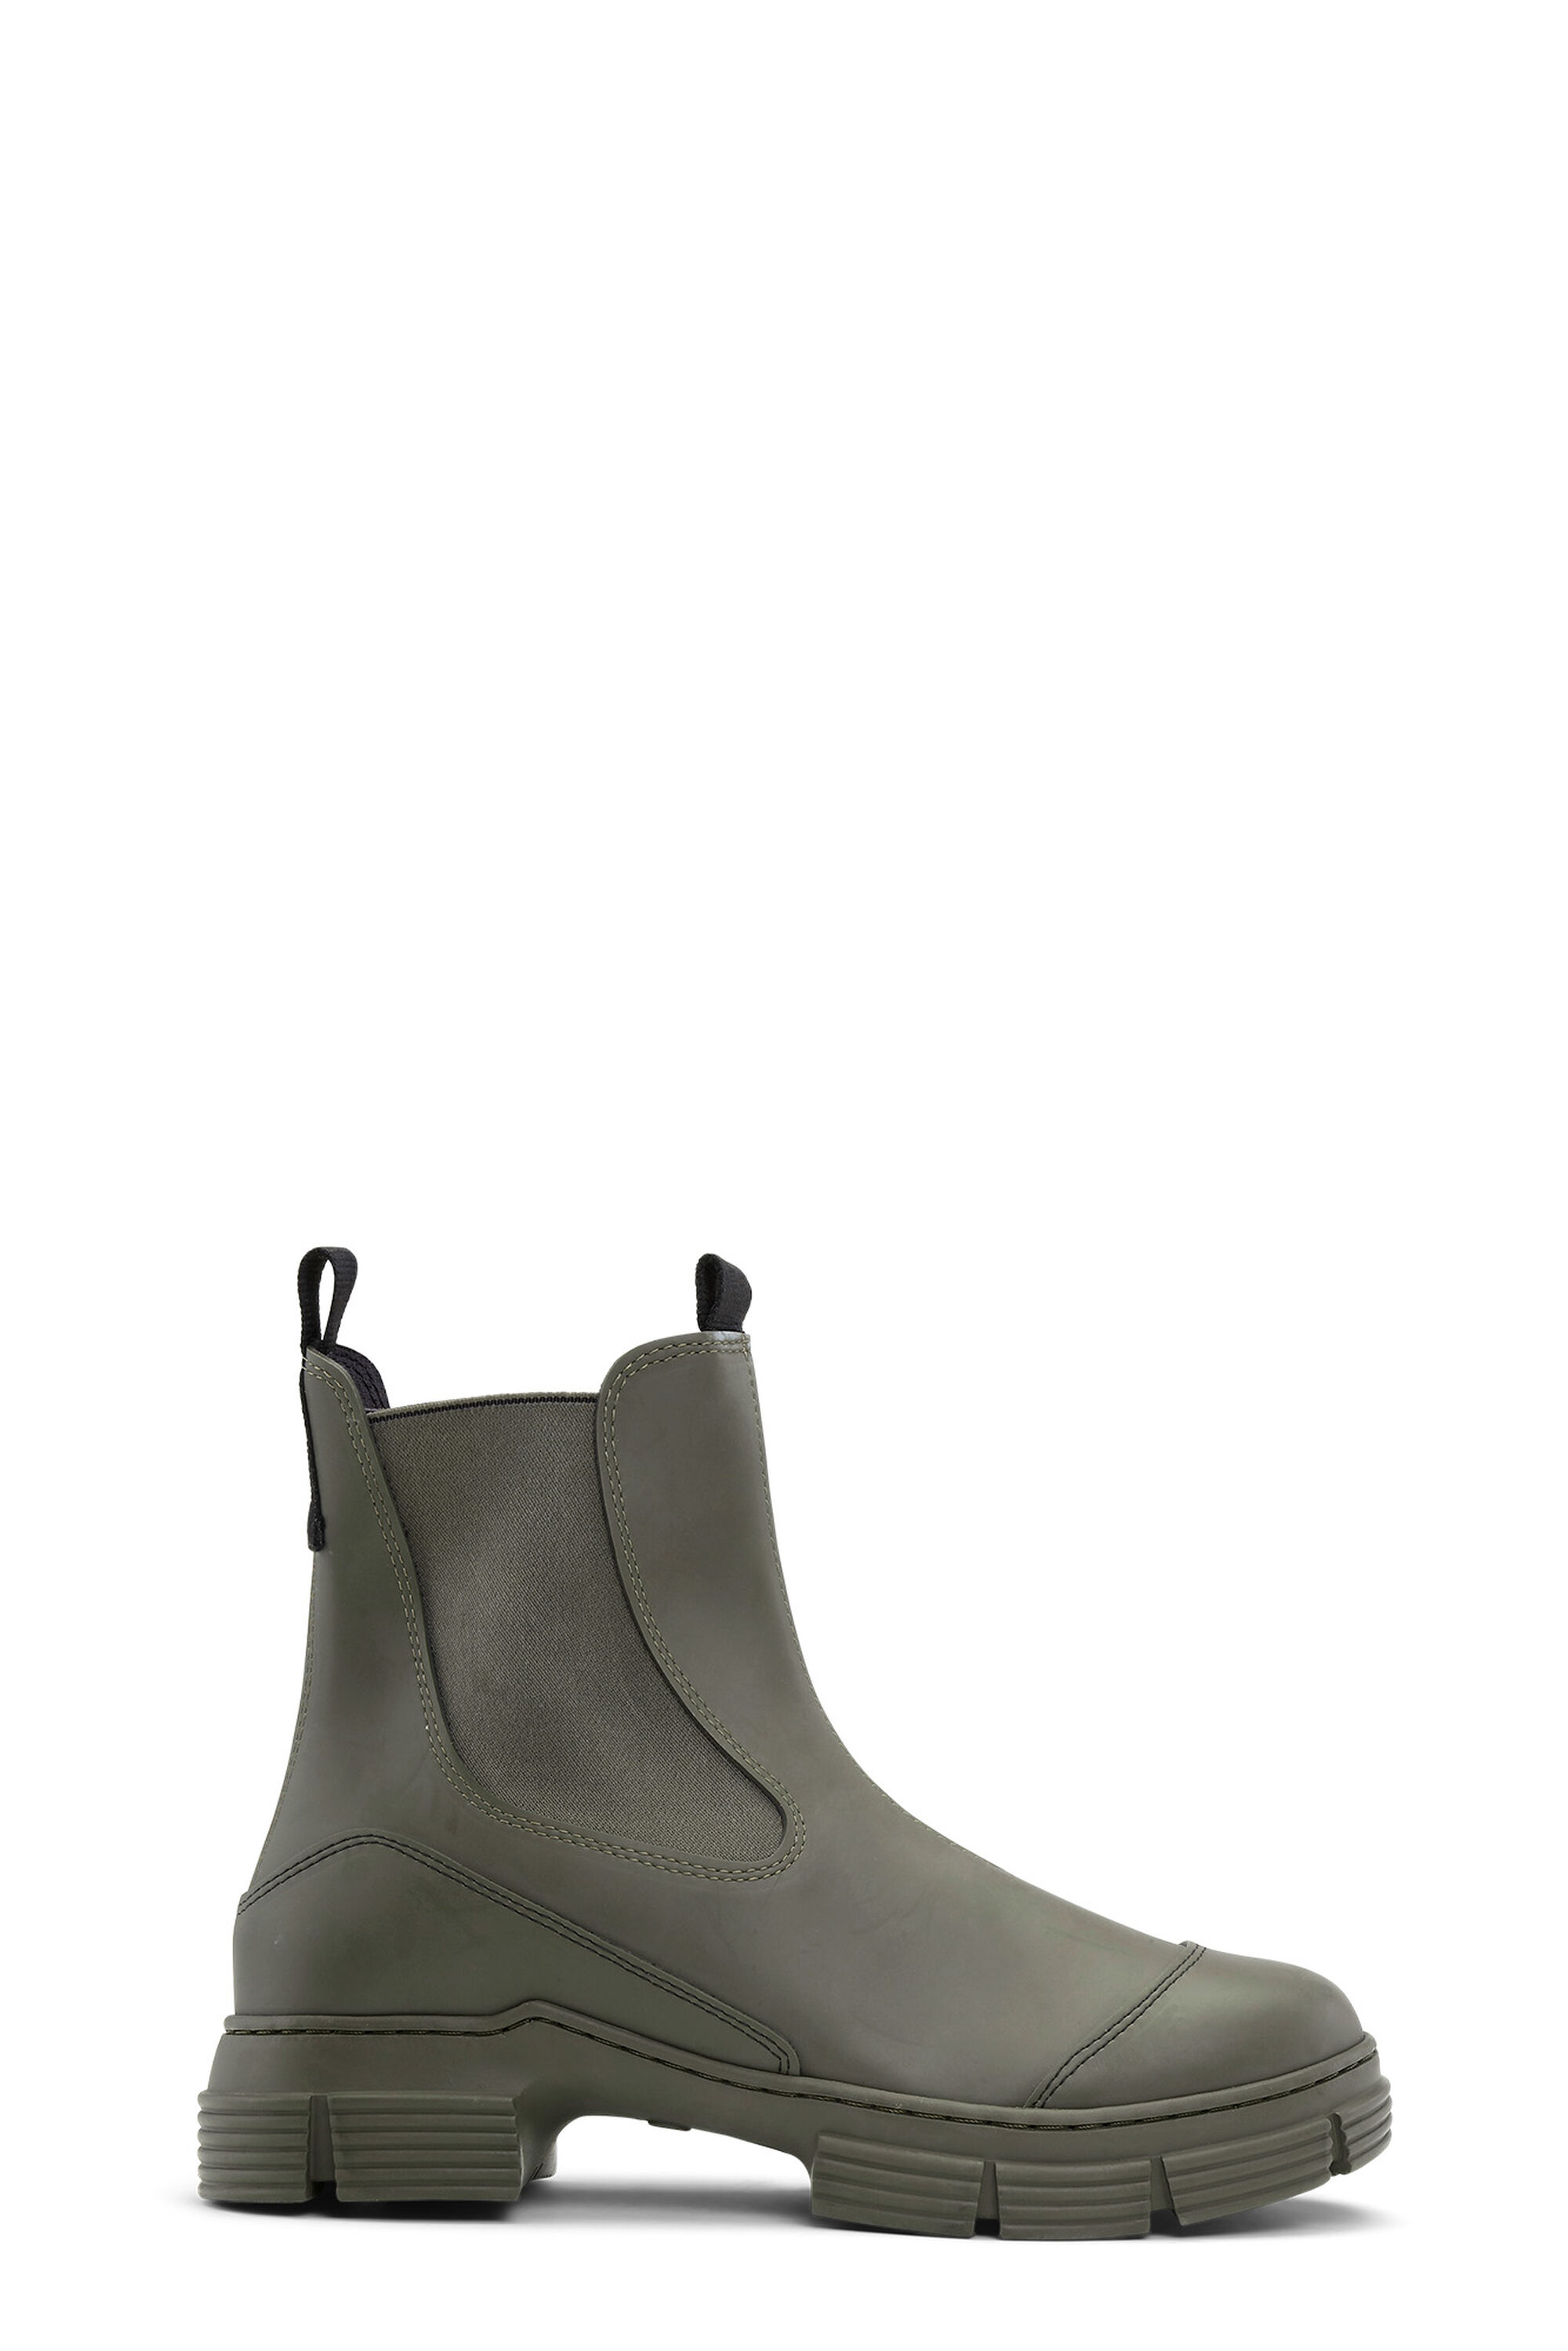 ganni.com | Recycled Rubber City Boot